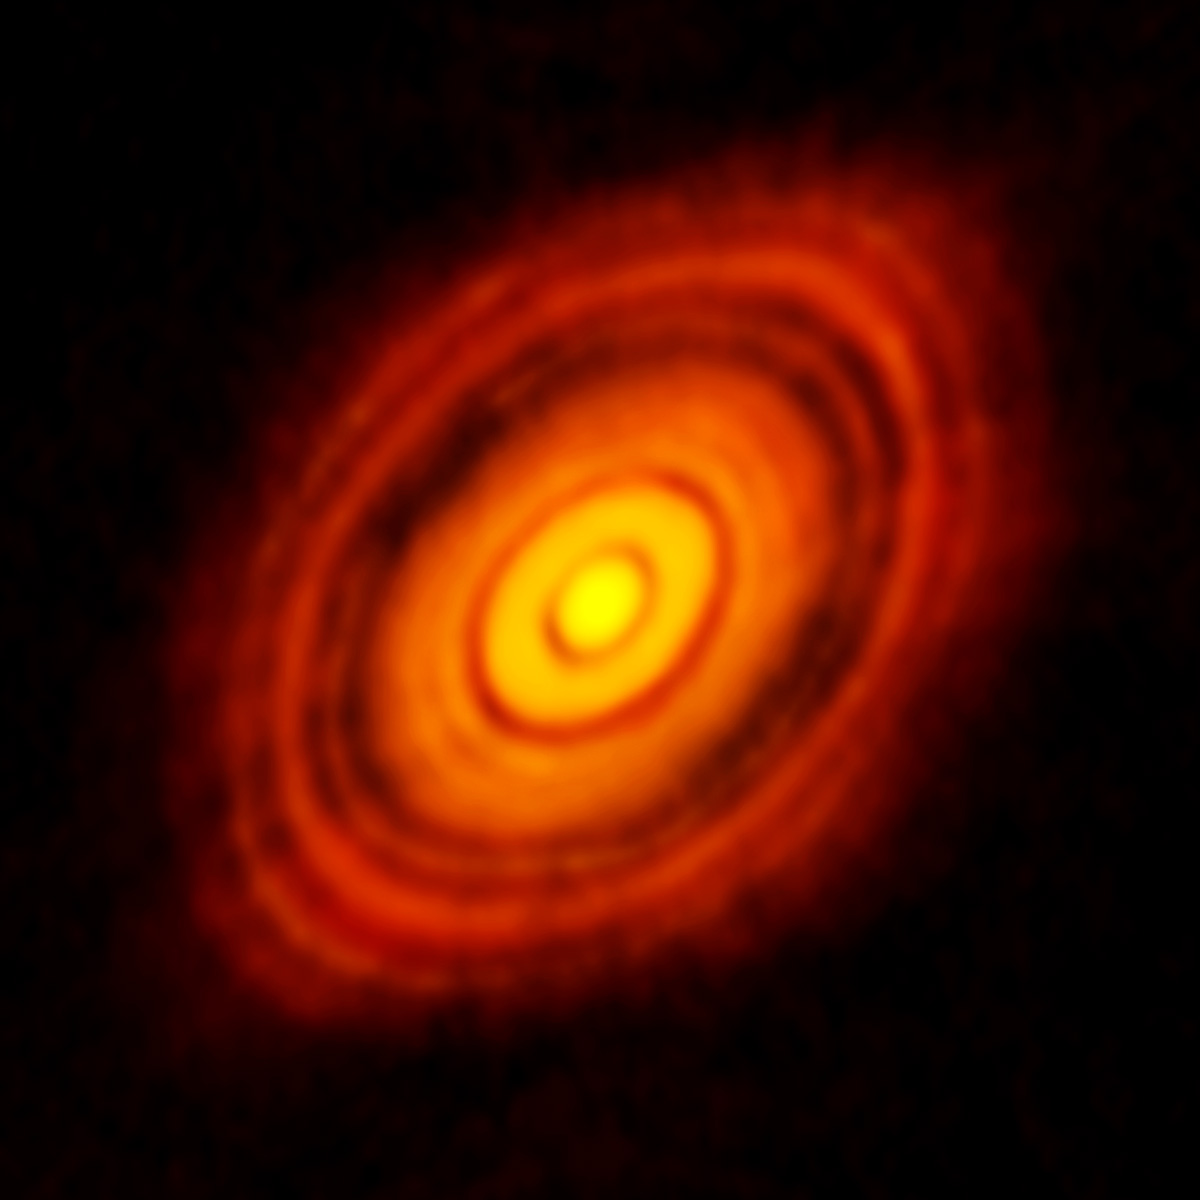 <p>ALMA has obtained its most detailed image yet showing the structure of the disc around HL Tau. It reveals extraordinarily fine detail that has never been seen before in the planet-forming disc around a young star.<br />
Credit: ALMA (/NRAO/ESO/NAOJ)</p>
